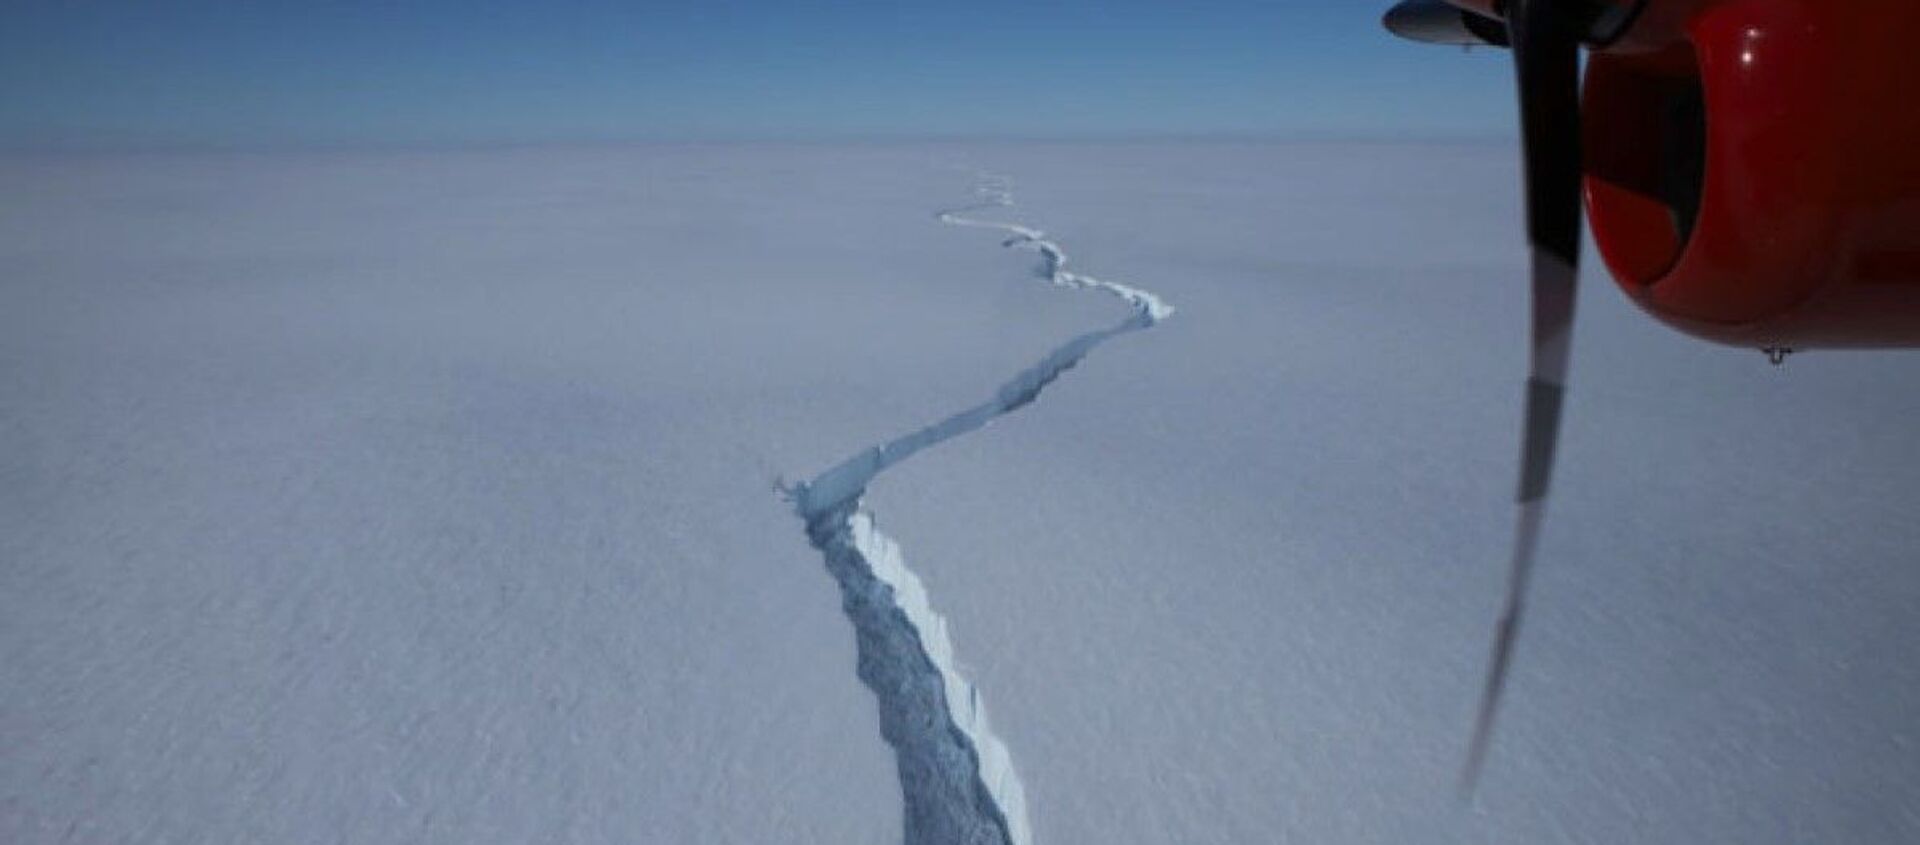 North Rift crack on the Brunt Ice Shelf photographed by the British Antarctic Survey's Halley team in January 2021 - Sputnik International, 1920, 27.02.2021